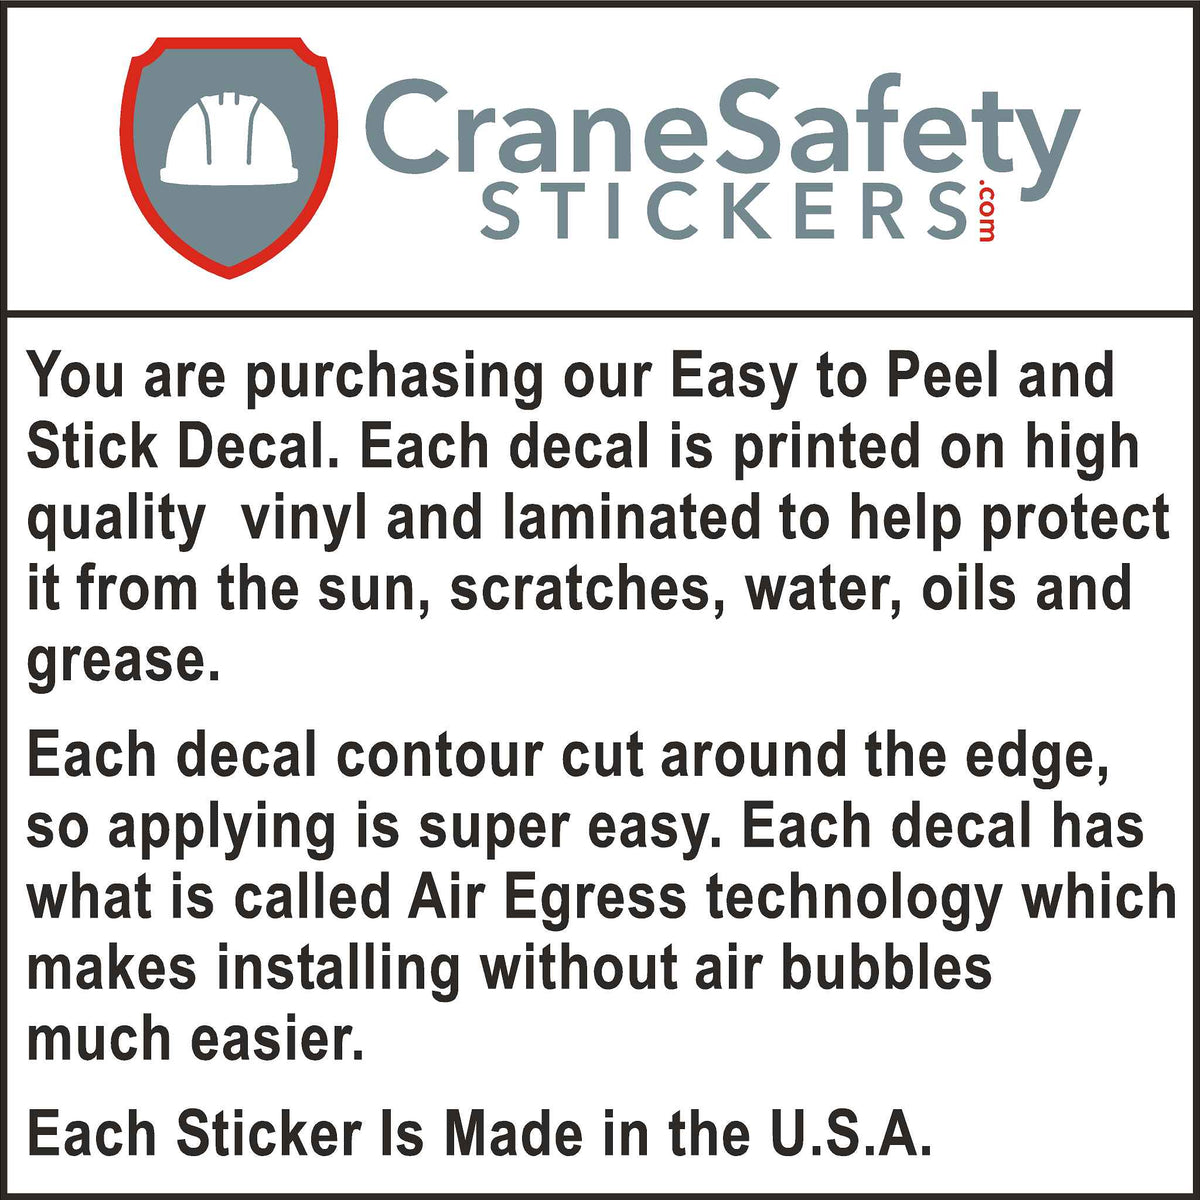 The Quality Of Our Pinch Point Safety Sticker, Keep Clear Of Moving Parts To Prevent Bodily Injury.